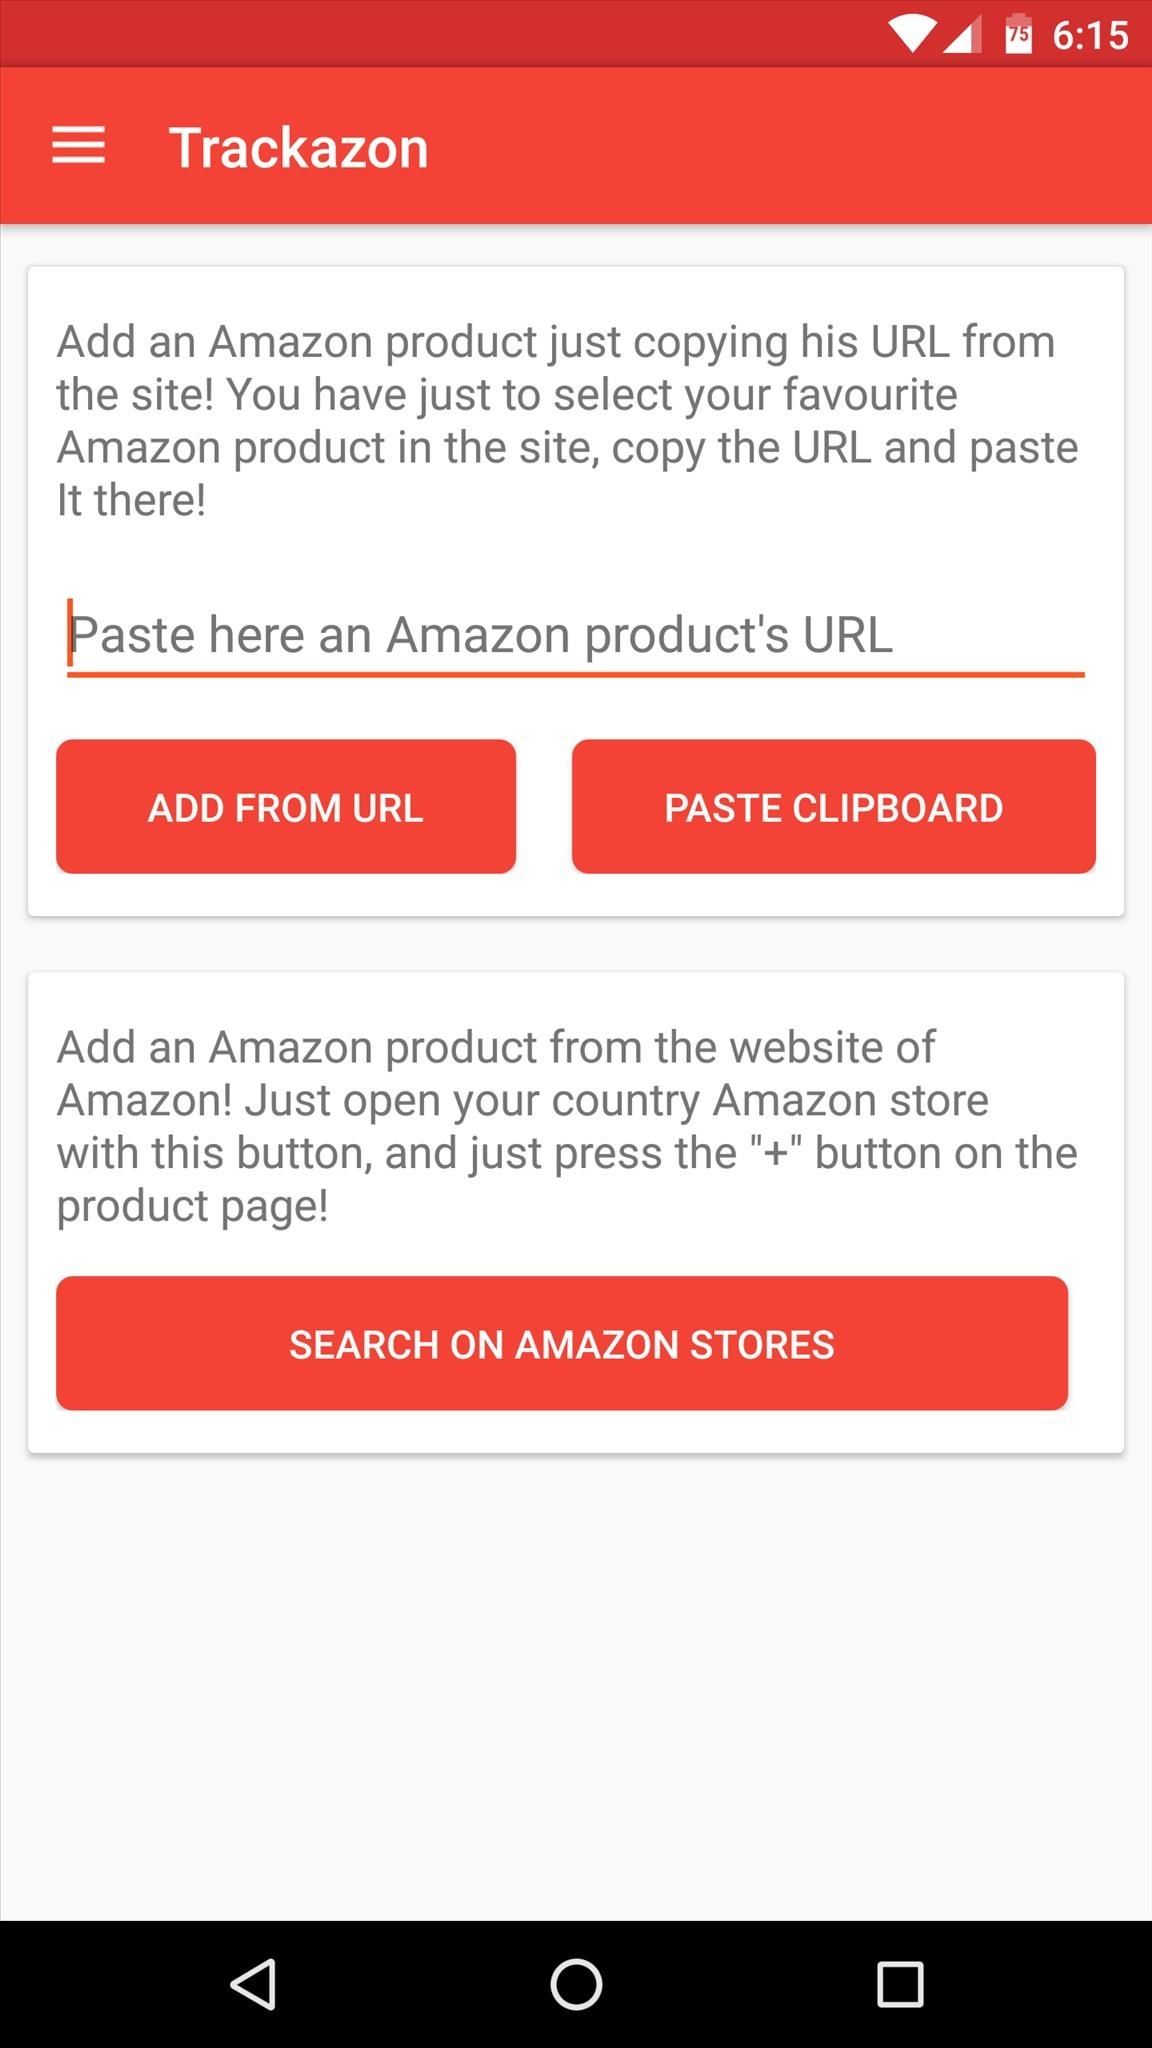 This App Helps You Get the Lowest Price on Anything from Amazon